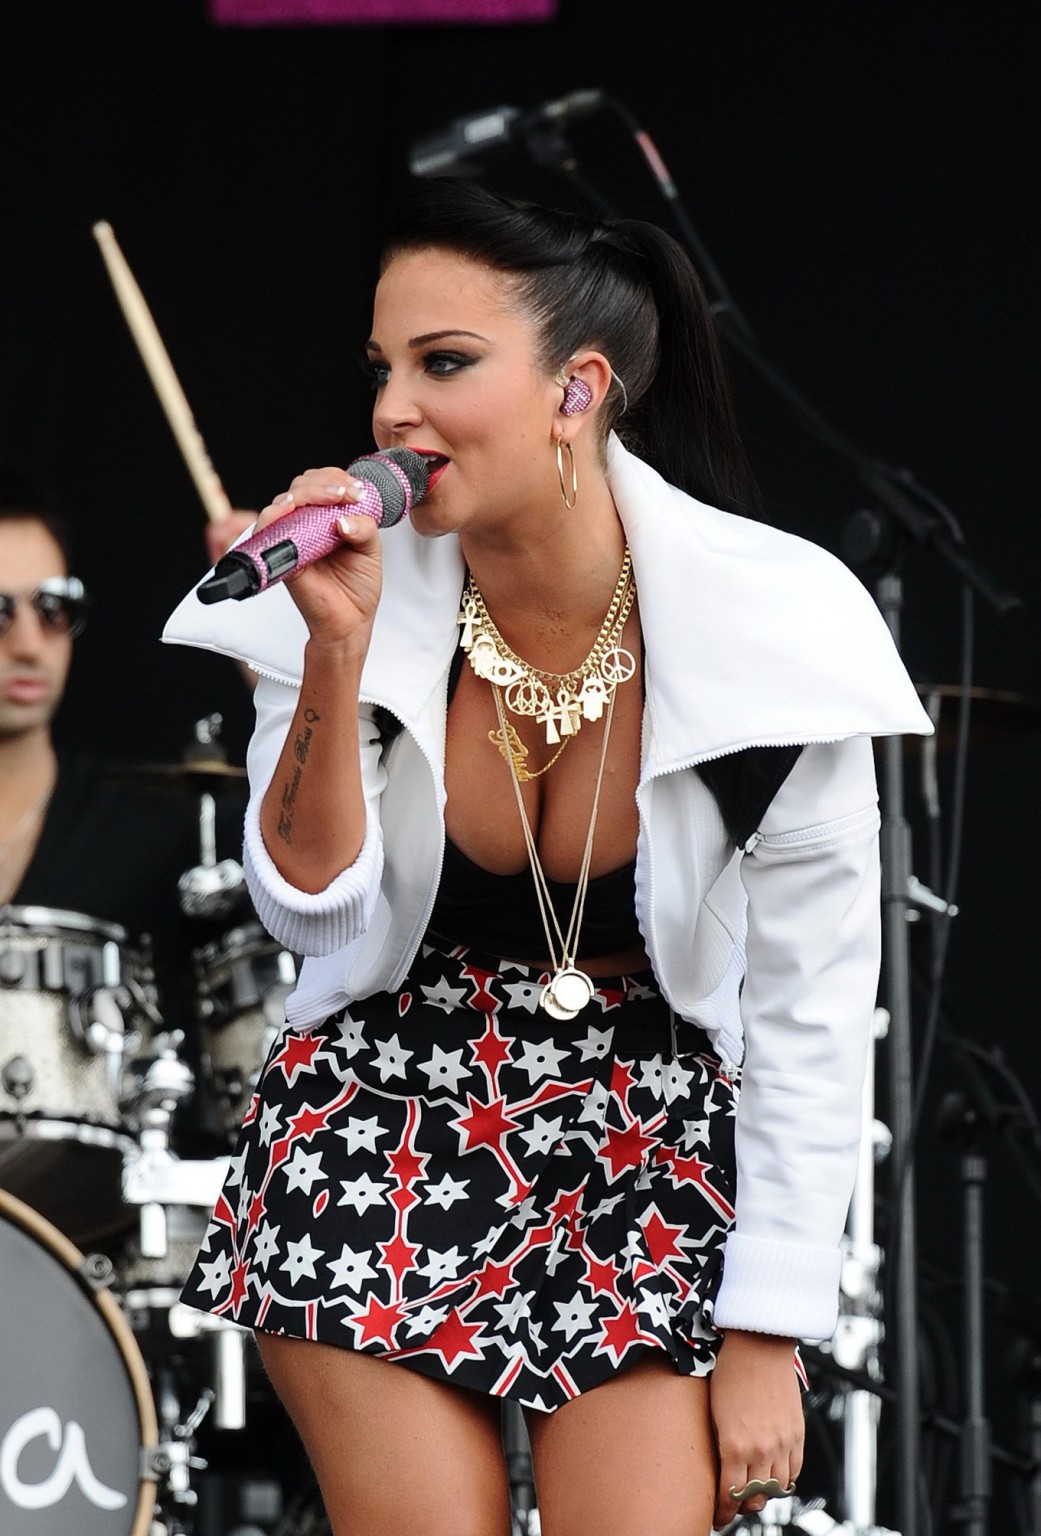 Tulisa Contostavlos busty wearing a skimpy black top at the Wireless Festival in #75257919